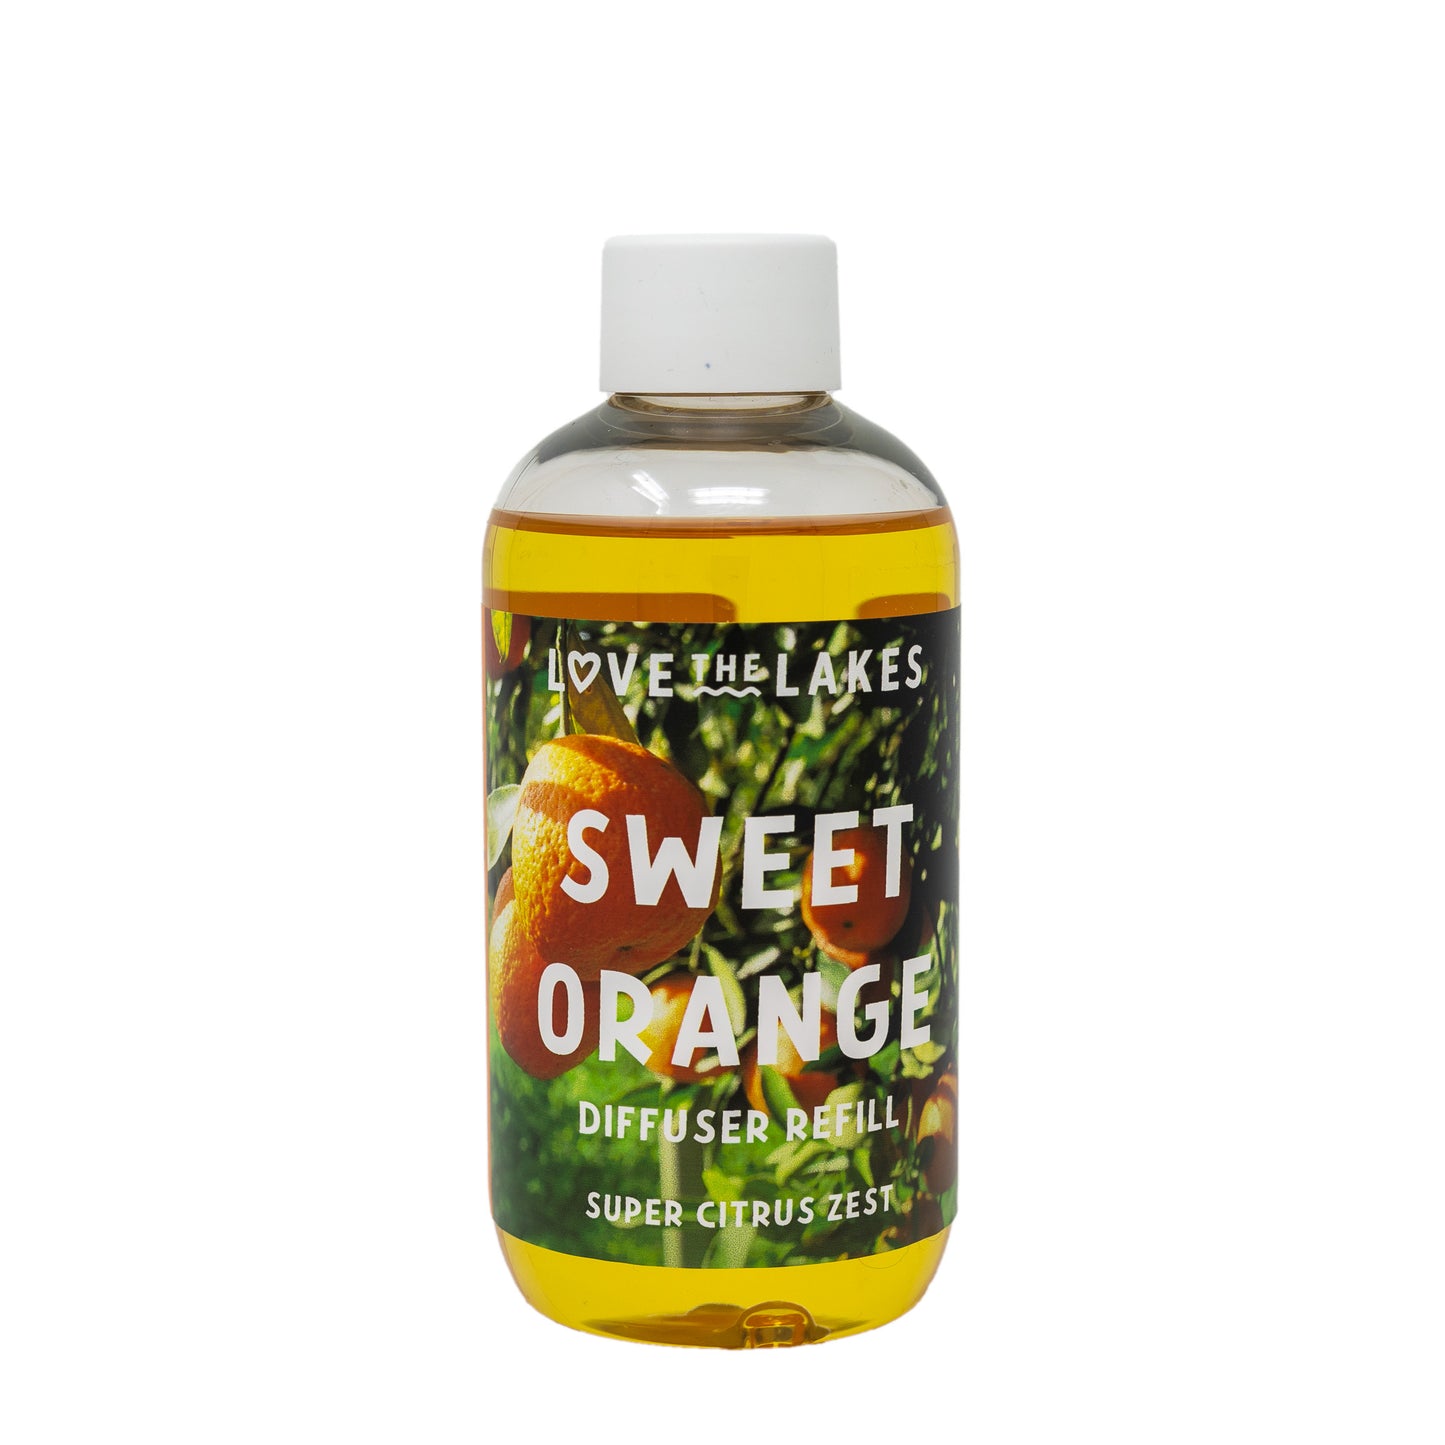 Love the Lakes Sweet Orange 200ml Reed Diffuser Refill